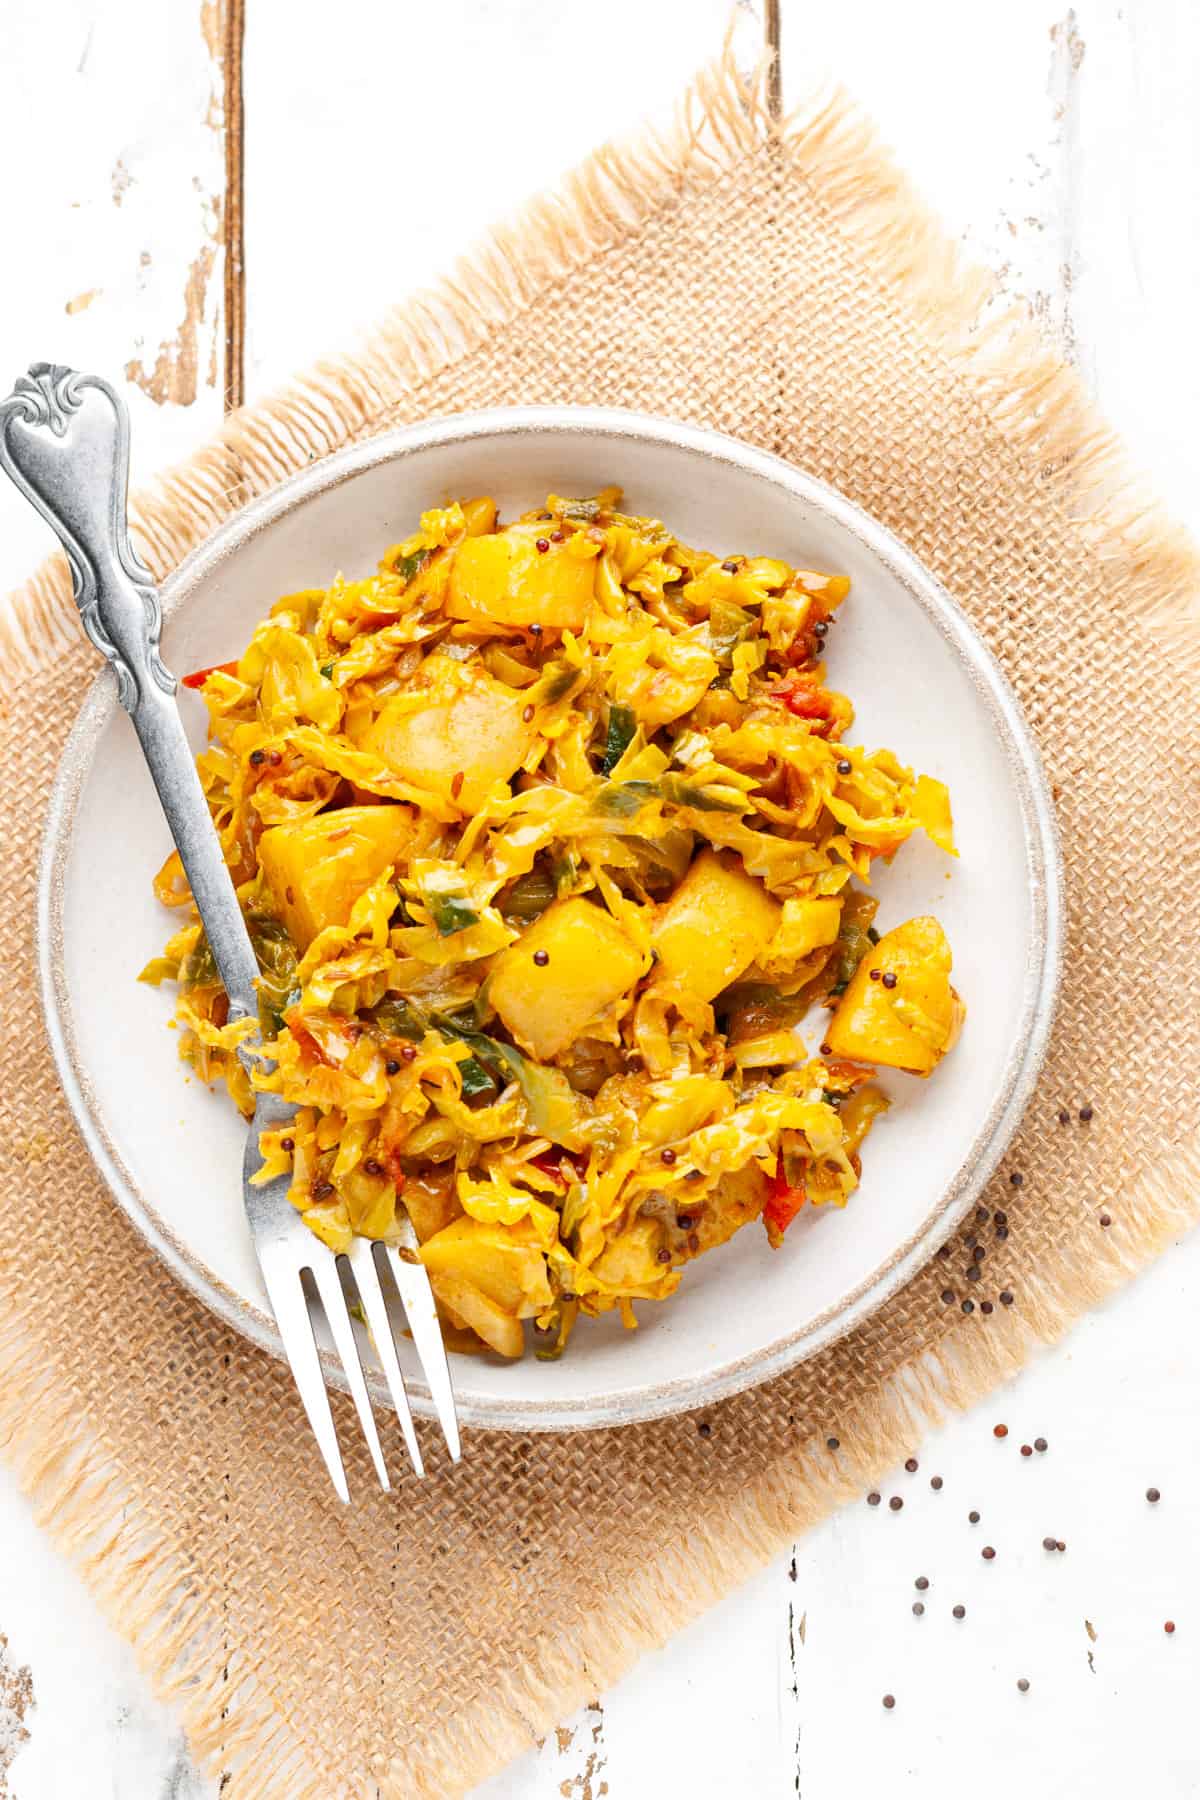 dry cabbage and potato sabzi in a plate with fork